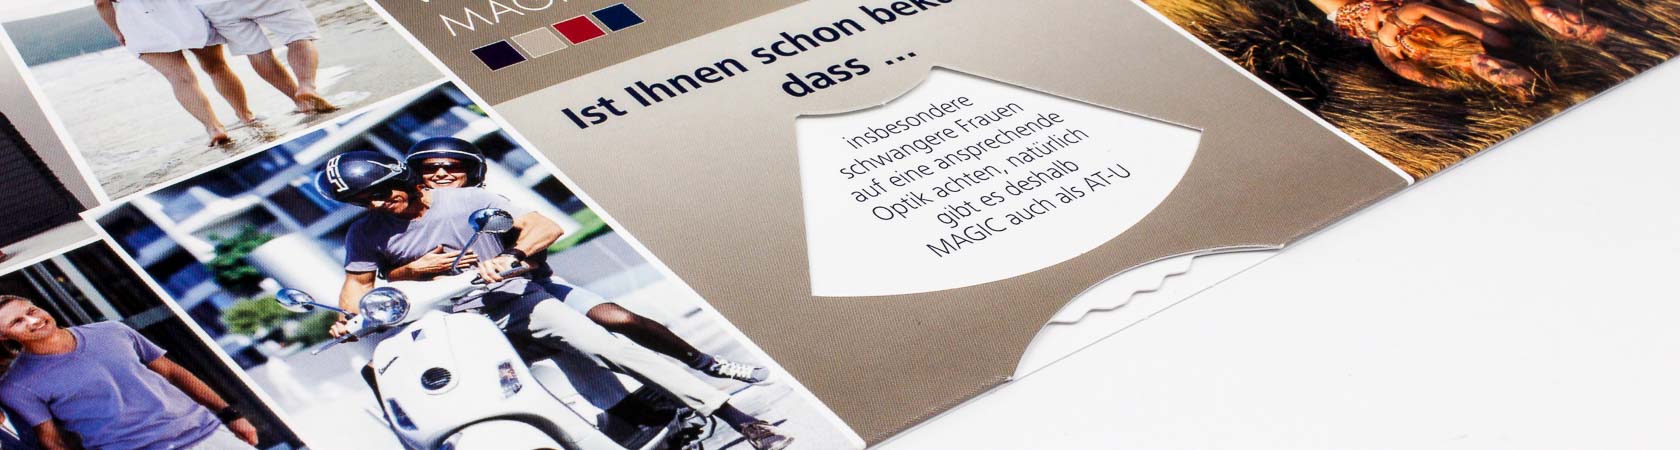 Drehscheibe in Direct-Mailing